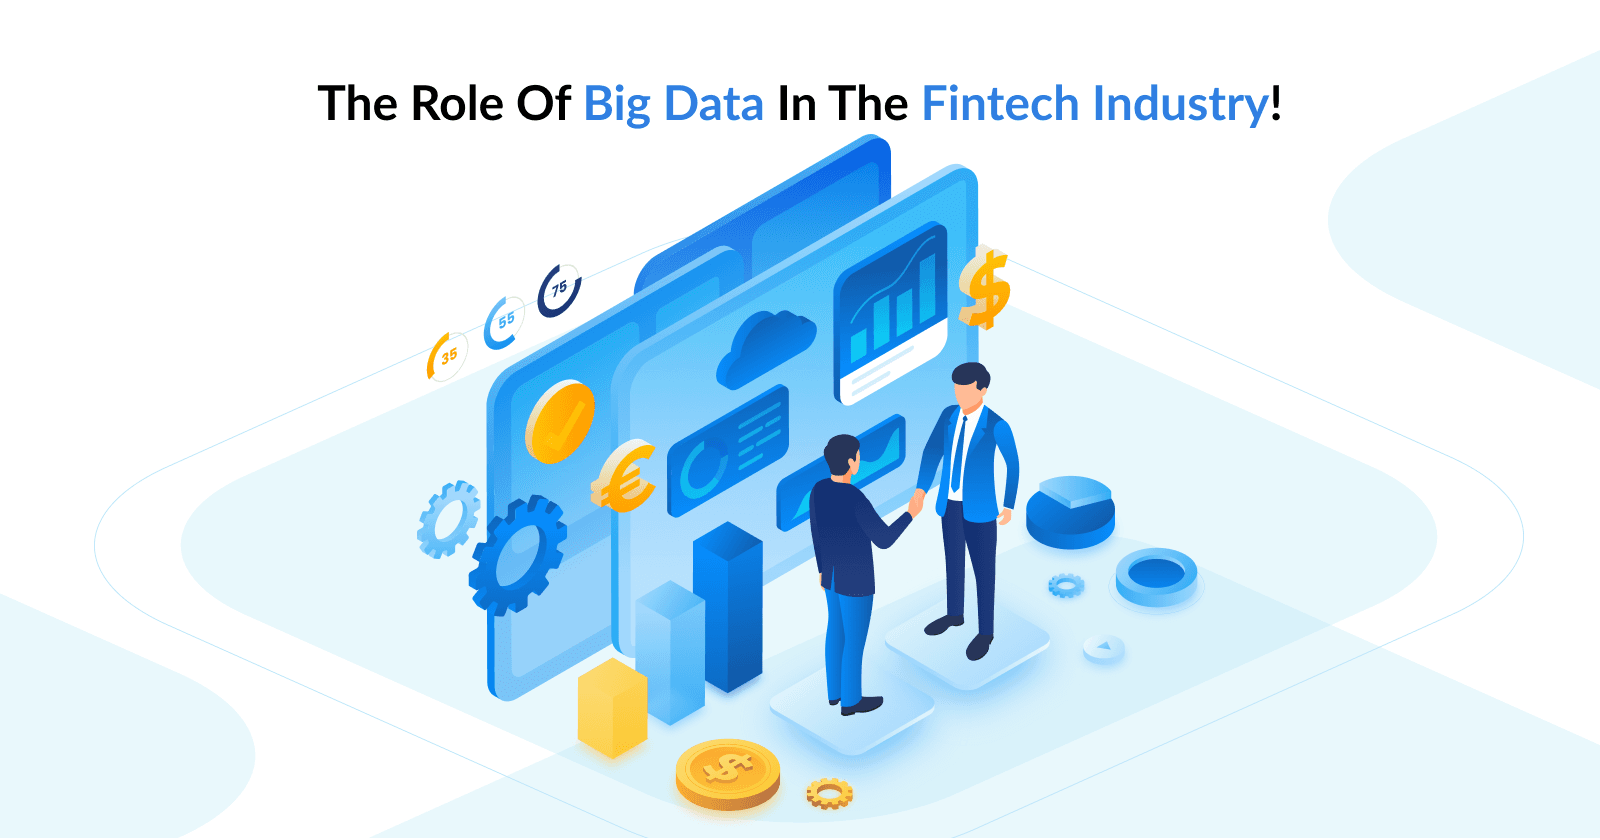 The role of Big Data in the Fintech Industry!